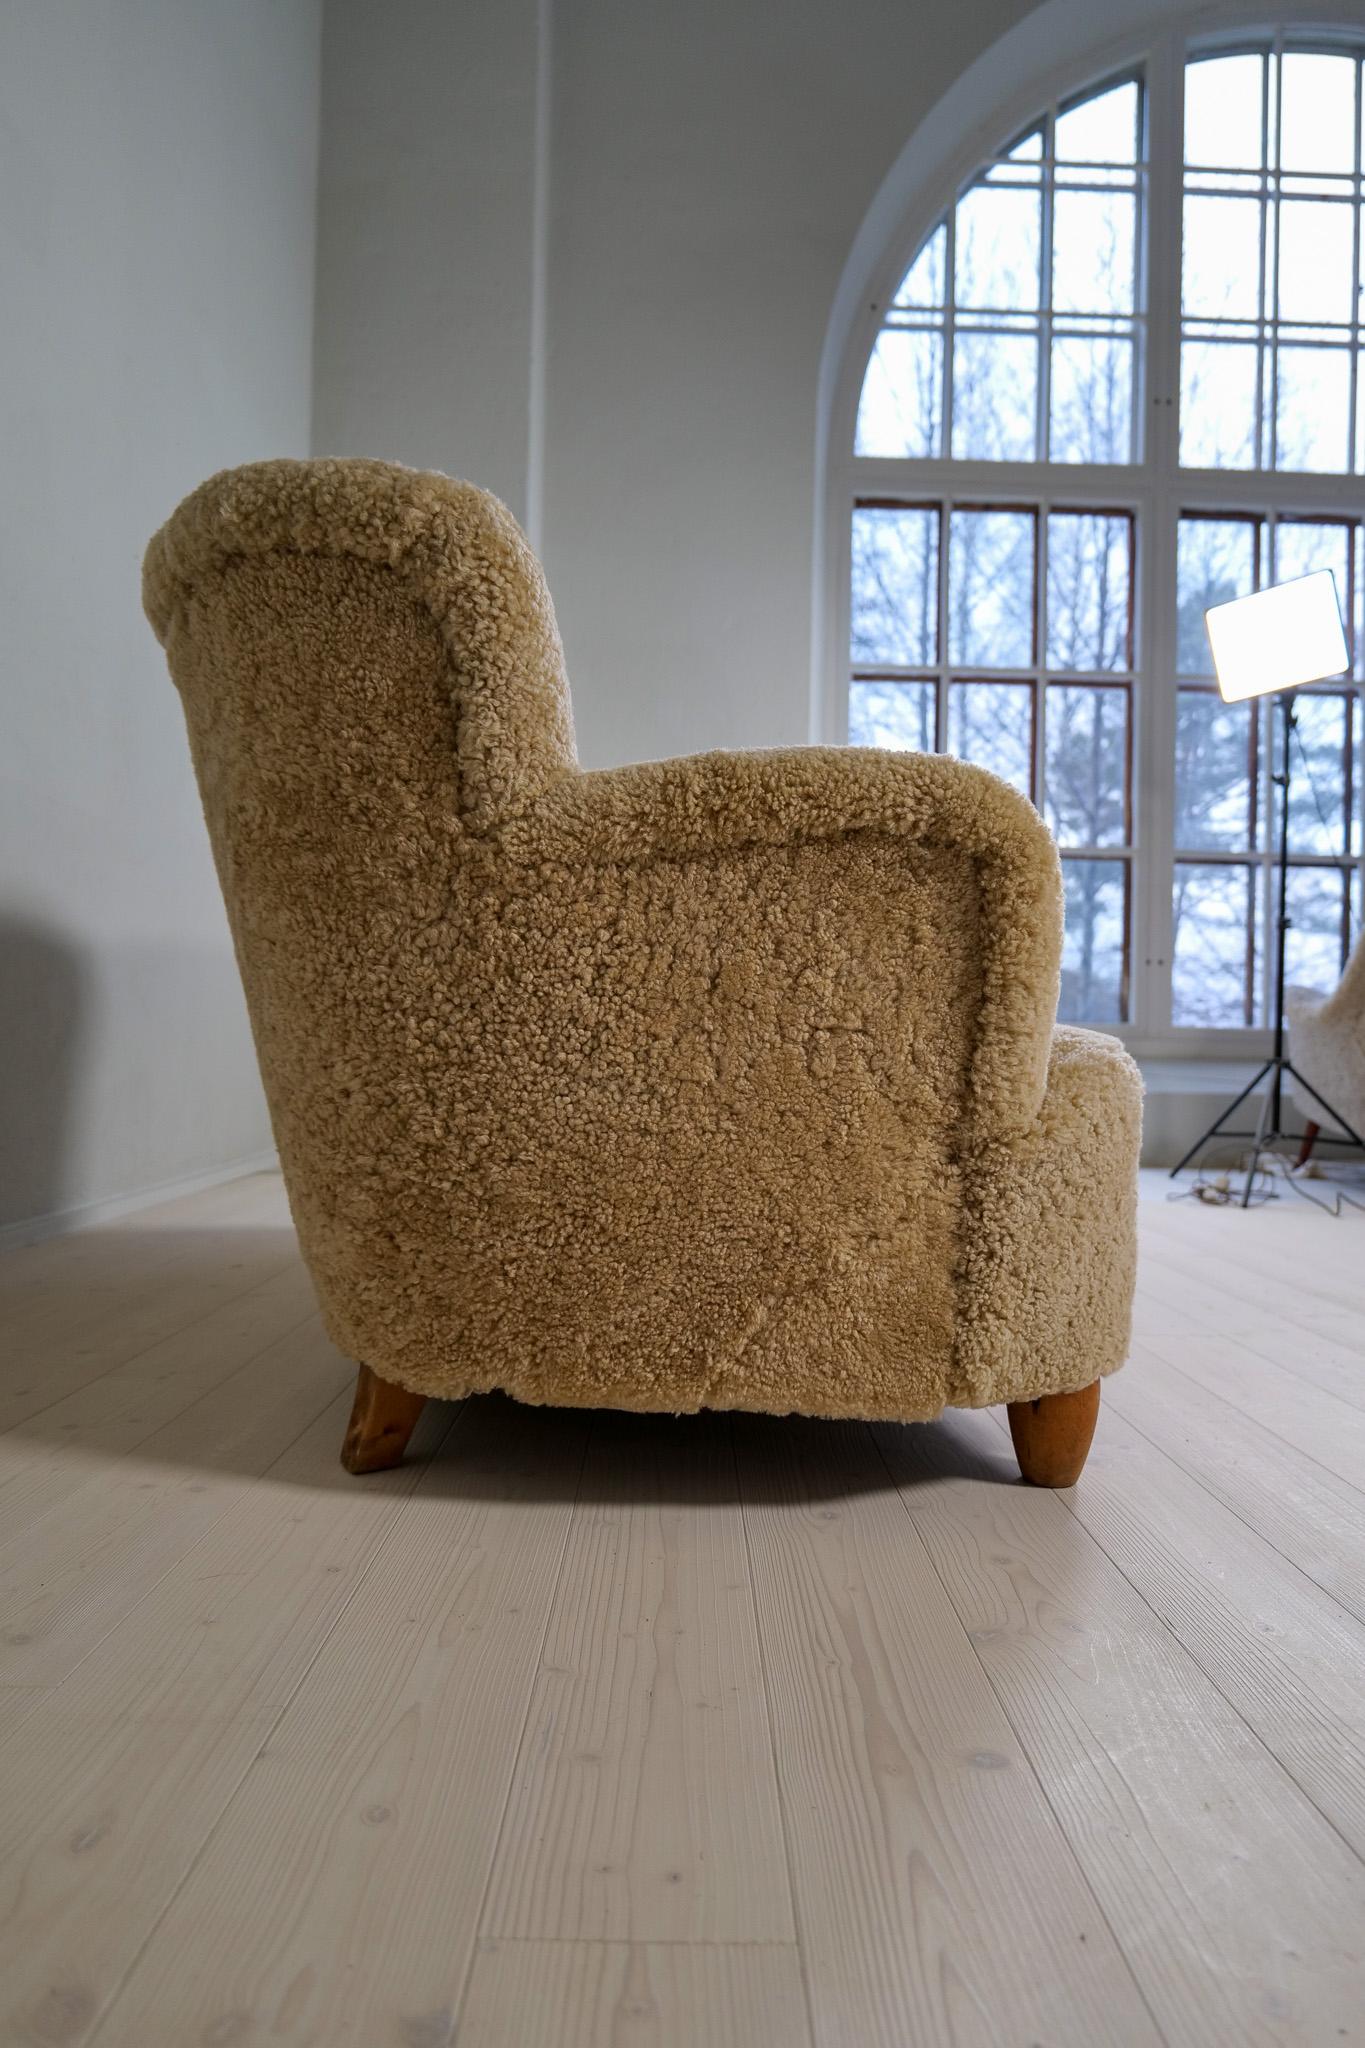 Midcentury Sculptrual Sheepskin/Shearling Sofa in Manors of Marta Blomstedt 7